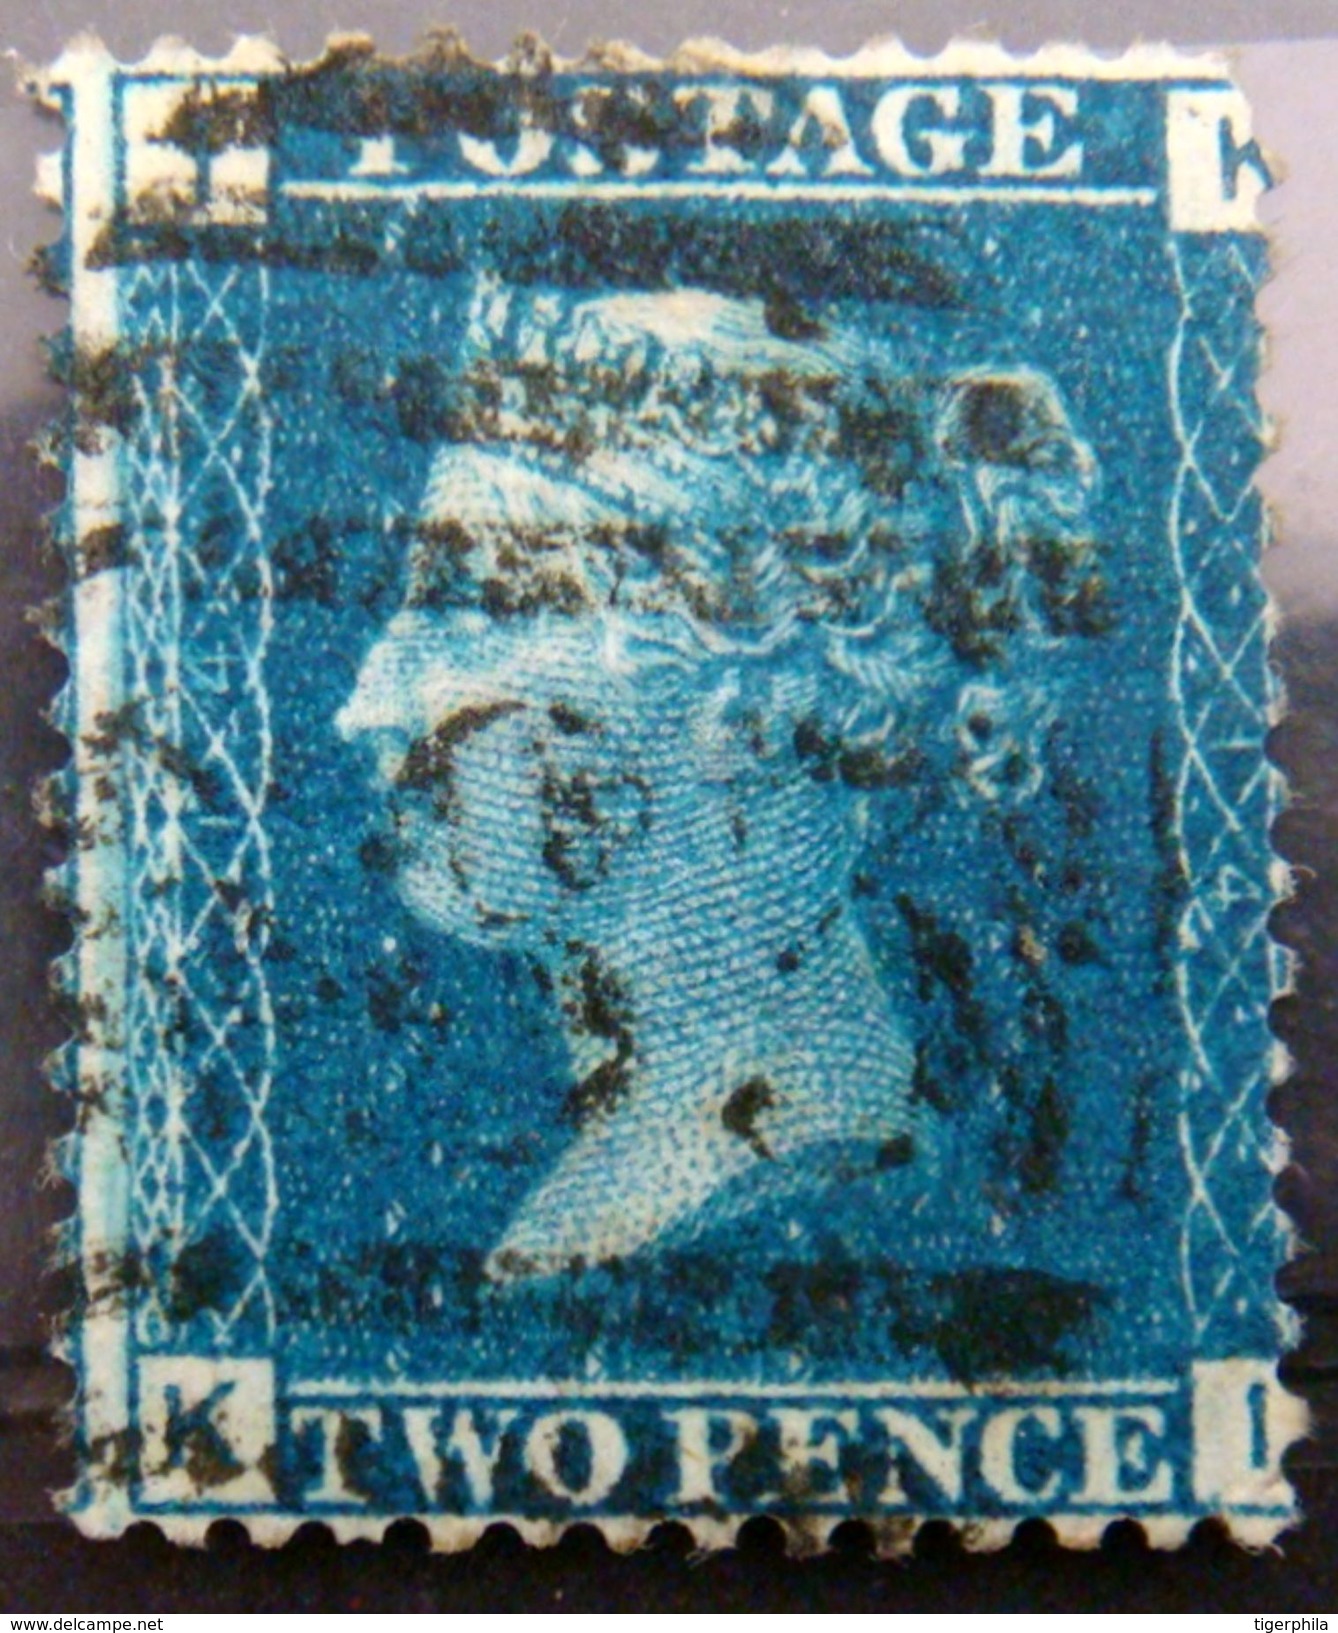 GREAT BRITAIN 1869 2d Queen Victoria PLATE 14 Used Scott 30P14 CV$38 WATERMARK : LARGE CROWN - Used Stamps